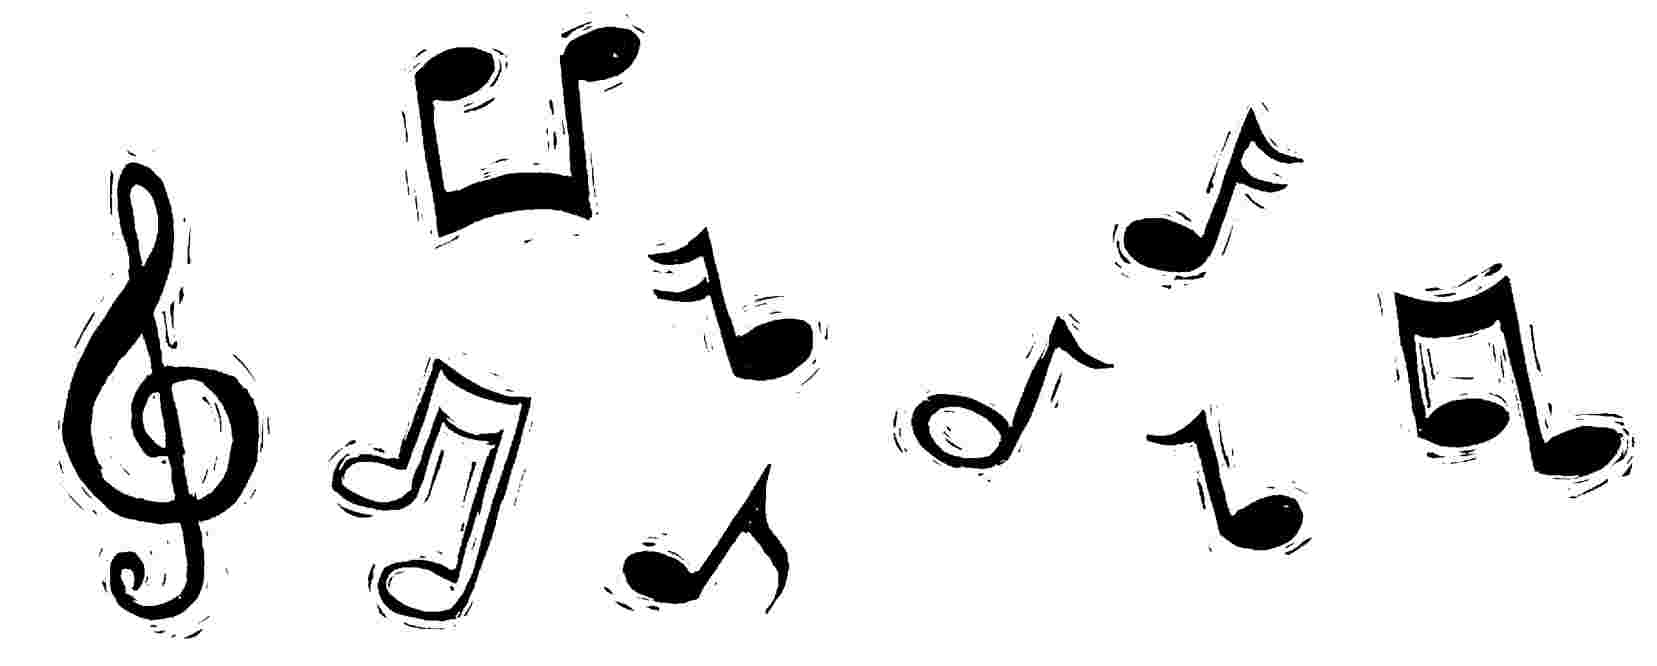 A Picture Of Music Signs - ClipArt Best